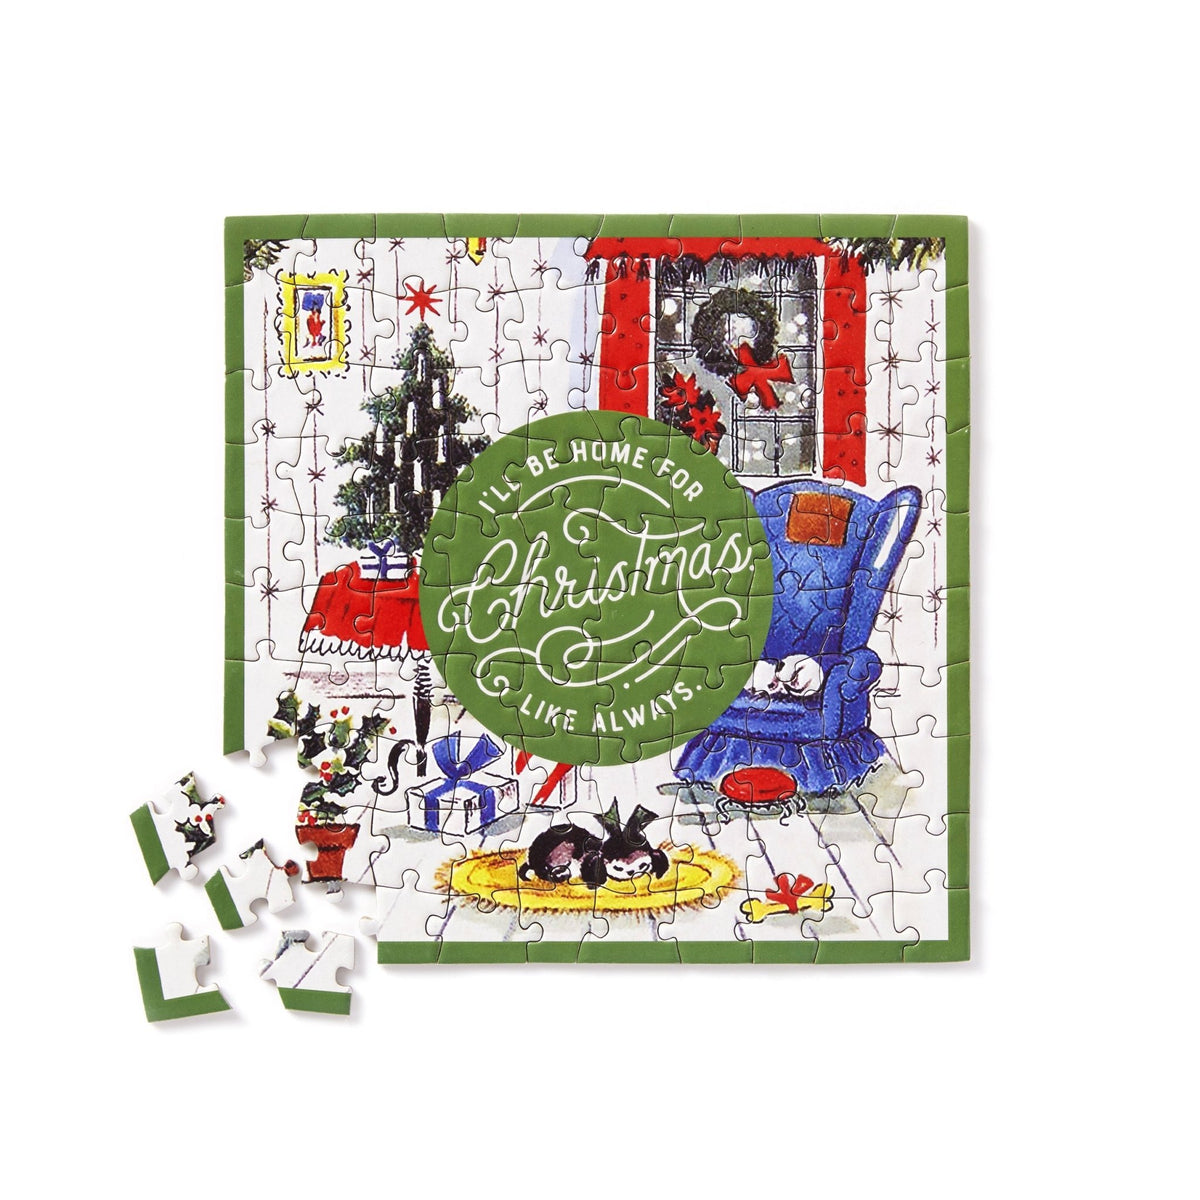 Home For Christmas 100 Piece Mini Shaped Puzzle - Brass Monkey - 9780735371736